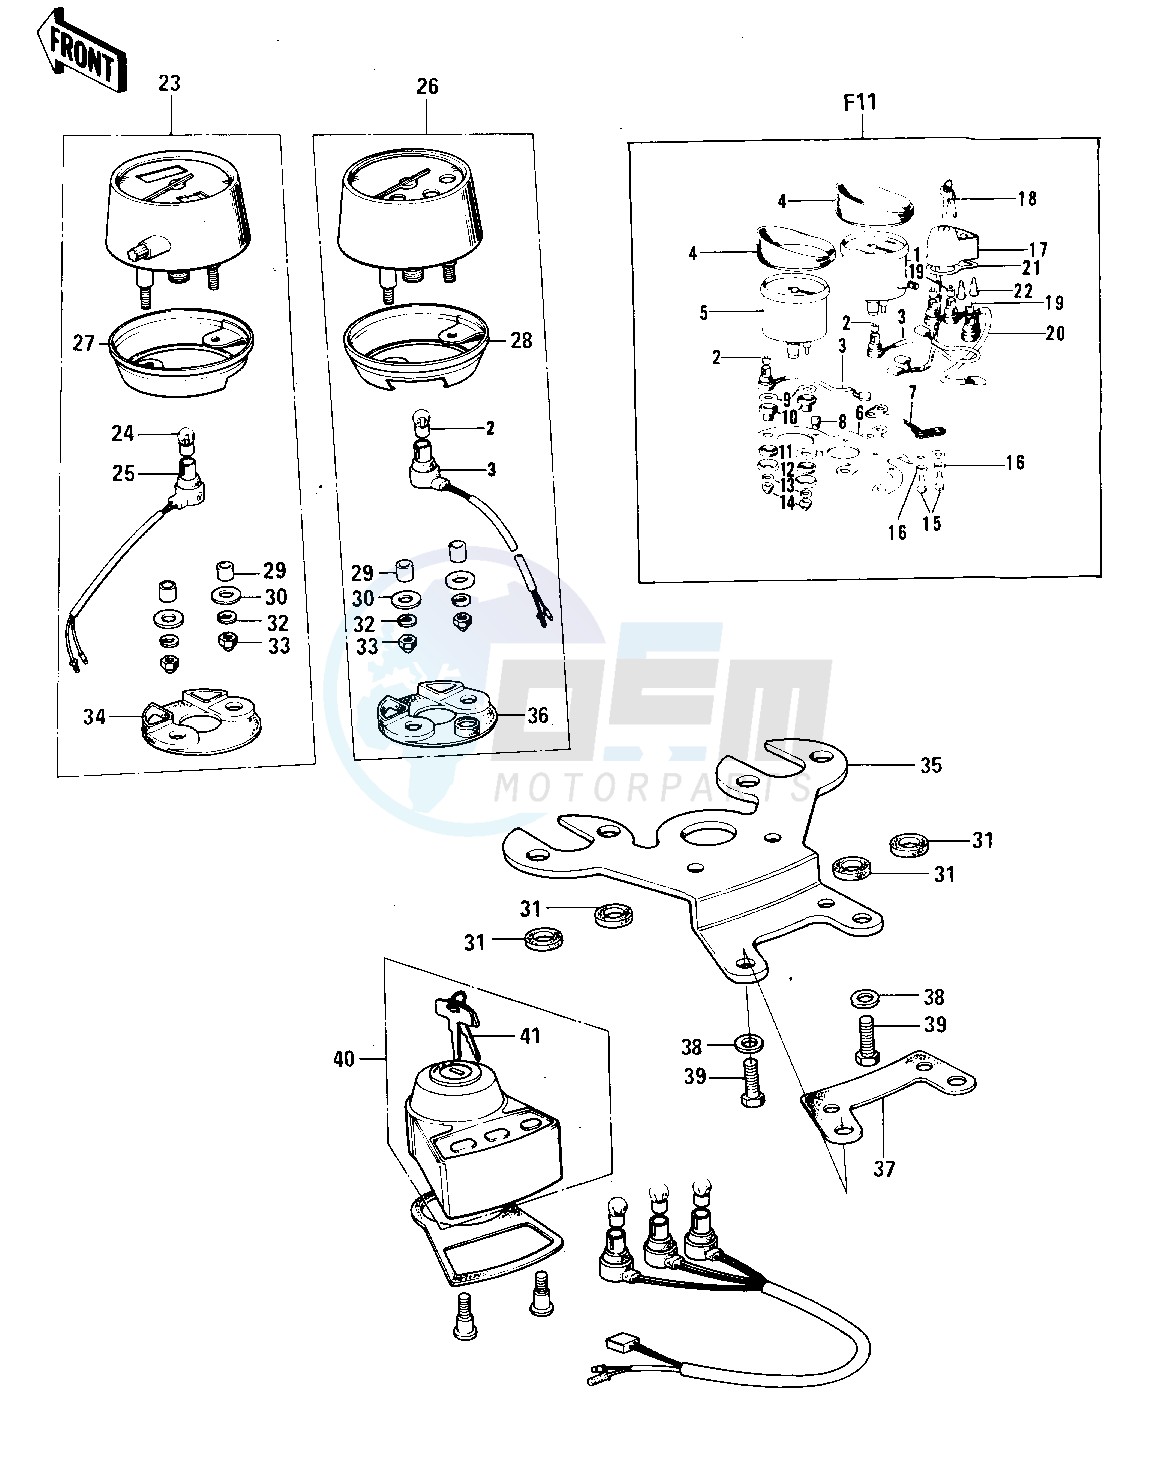 METERS_IGNITION SWITCH blueprint